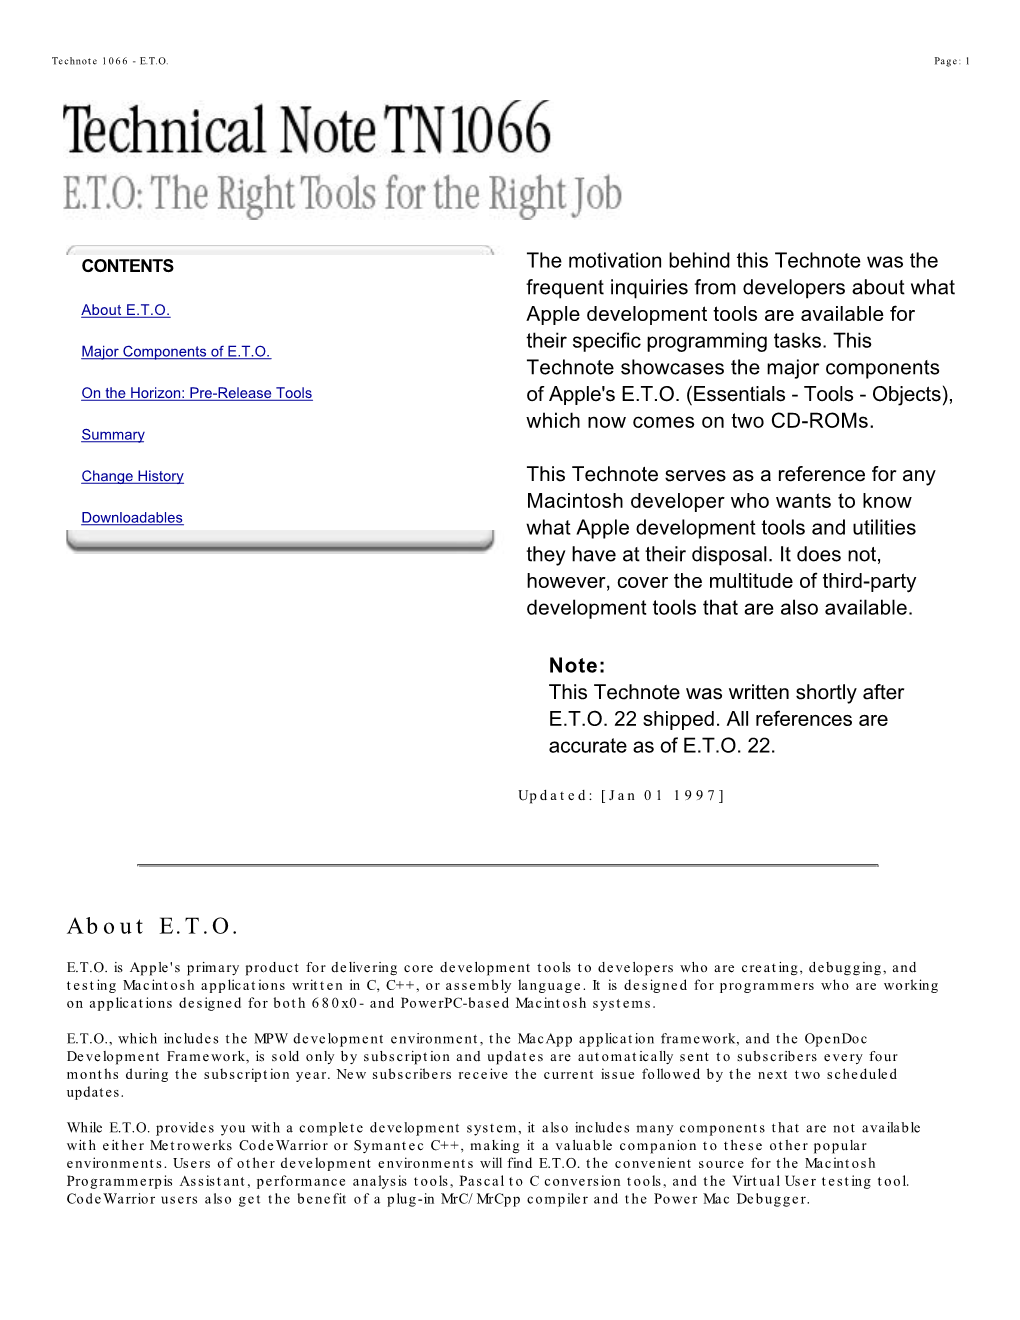 About E.T.O. Apple Development Tools Are Available for Their Specific Programming Tasks